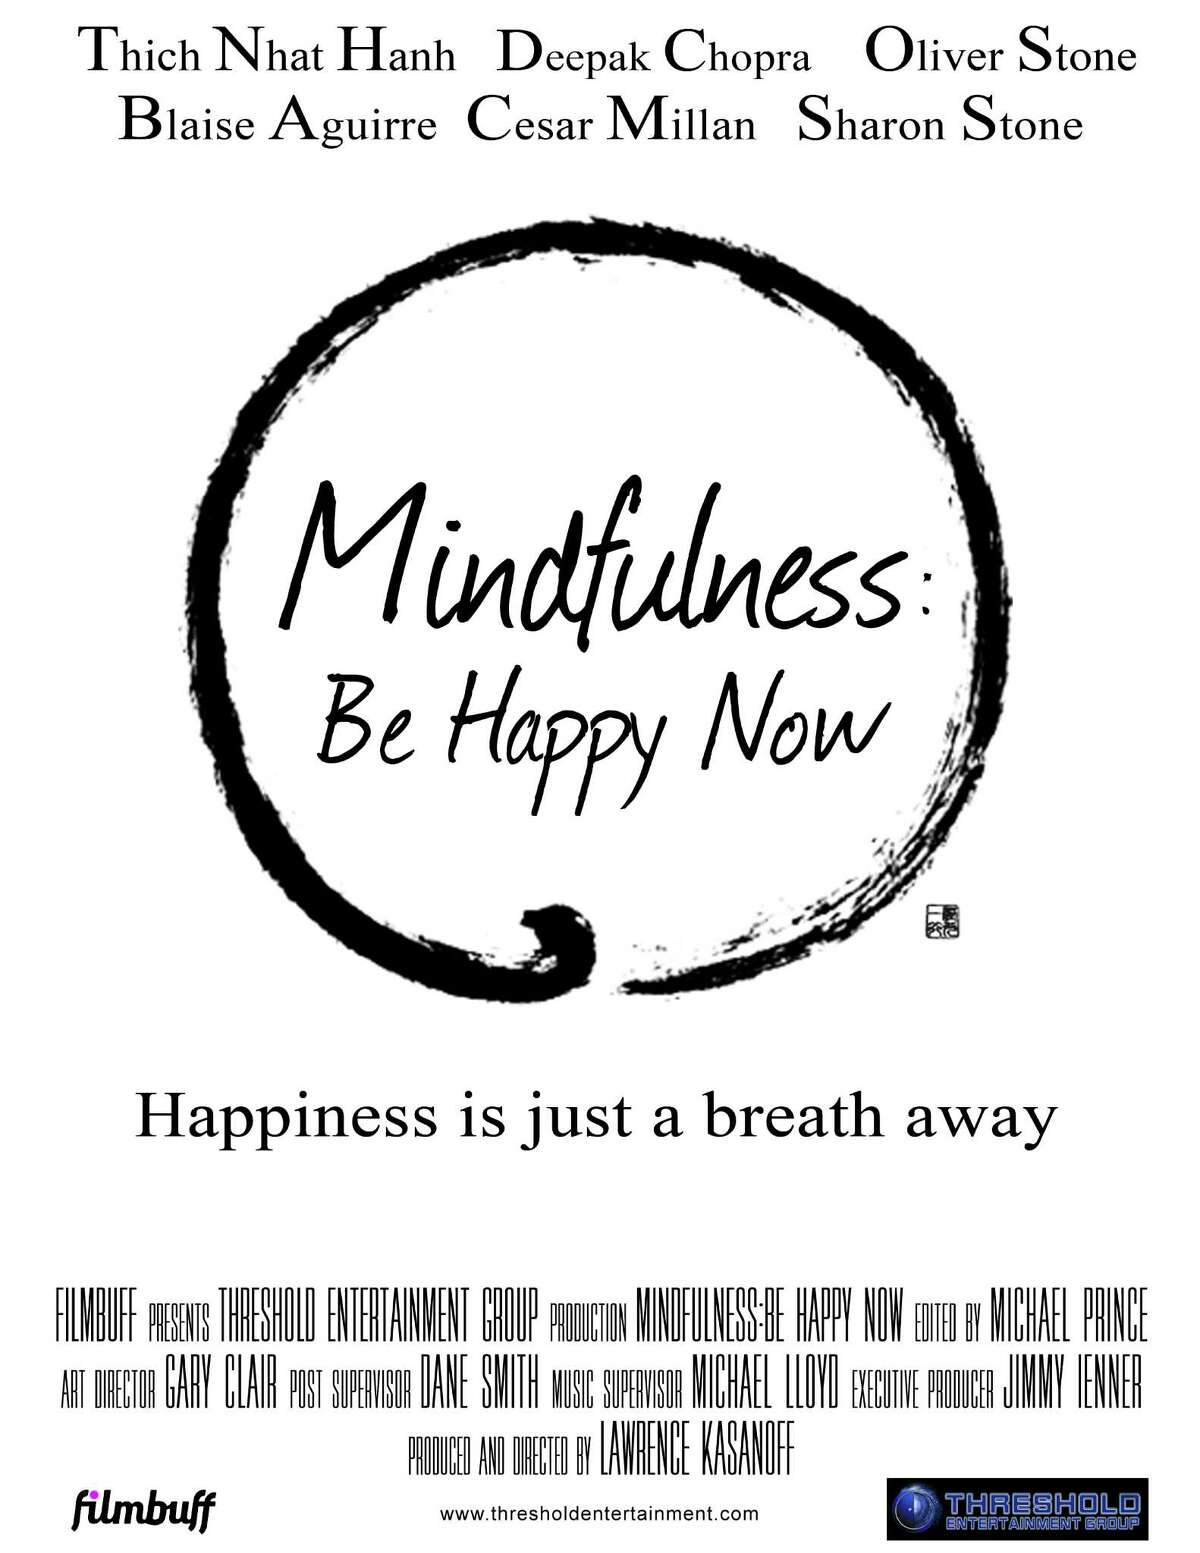 "Mindfulness: Be Happy Now" poster, a new film by Lawrence Kasanoff.